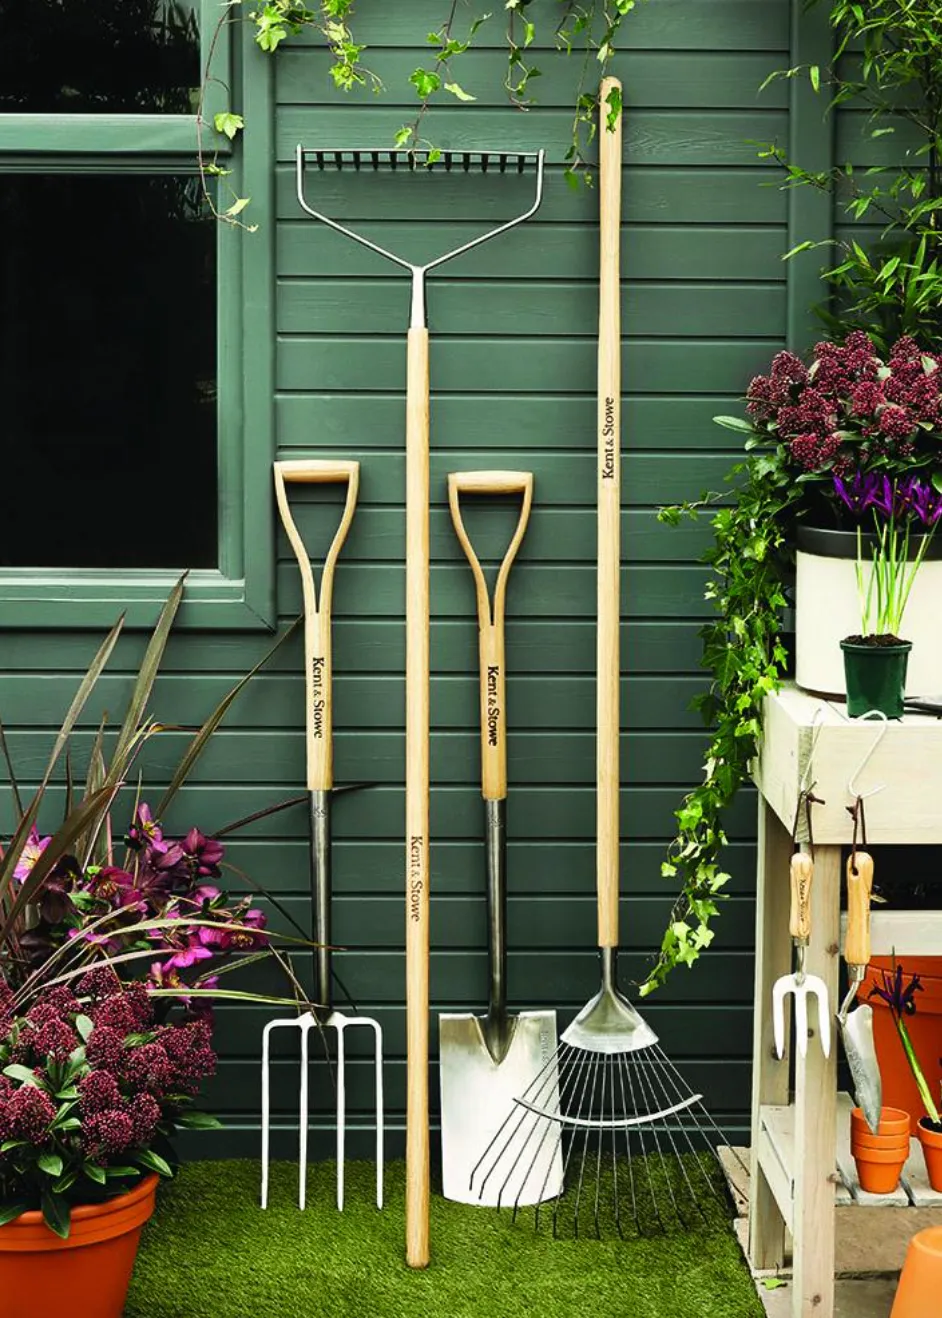 Get a good selection of garden tools to tackle the veg patch. Digging fork, border fork and spade, £34.99 each; rake, £29.99, all Dobbies